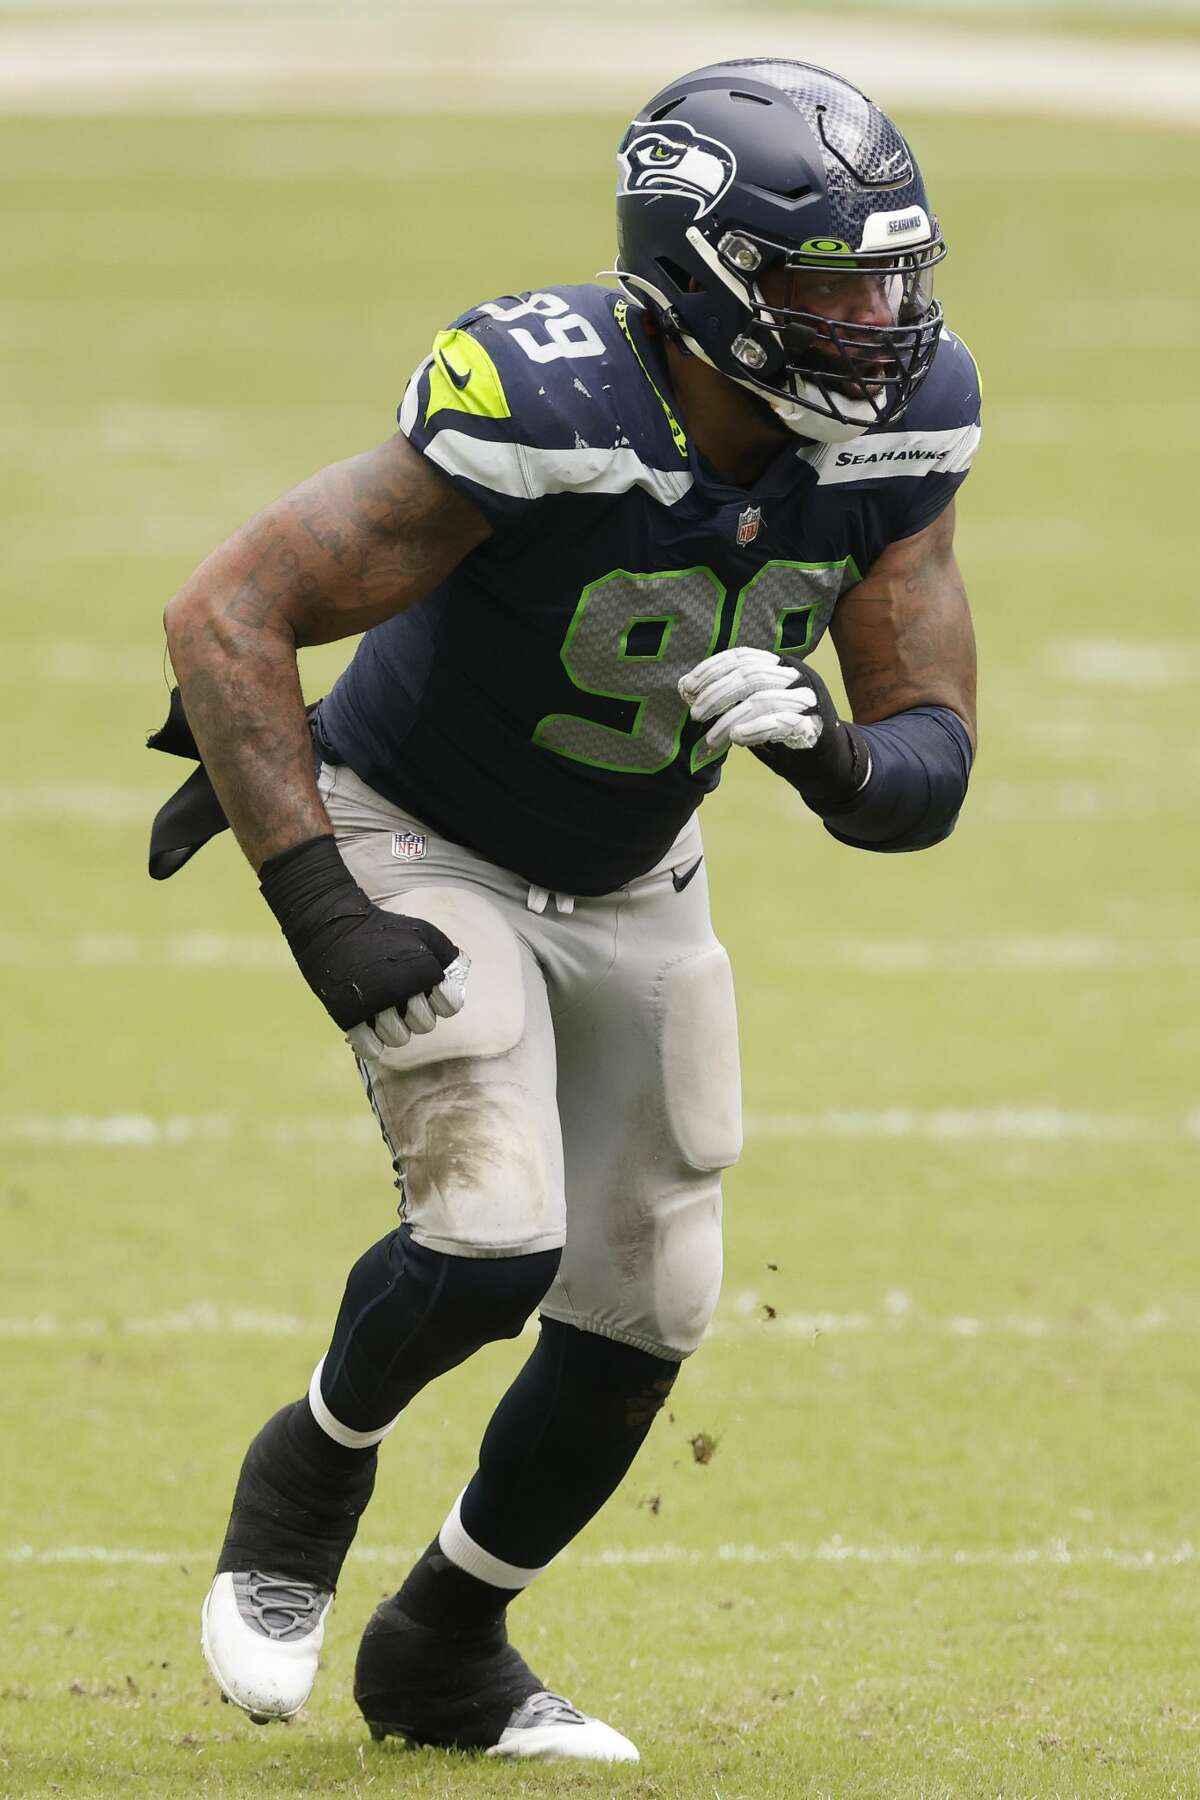 MIAMI GARDENS, FLORIDA - OCTOBER 04: Damontre Moore #99 of the Seattle Seahawks in action against the Miami Dolphins during the second half at Hard Rock Stadium on October 04, 2020 in Miami Gardens, Florida. (Photo by Michael Reaves/Getty Images)